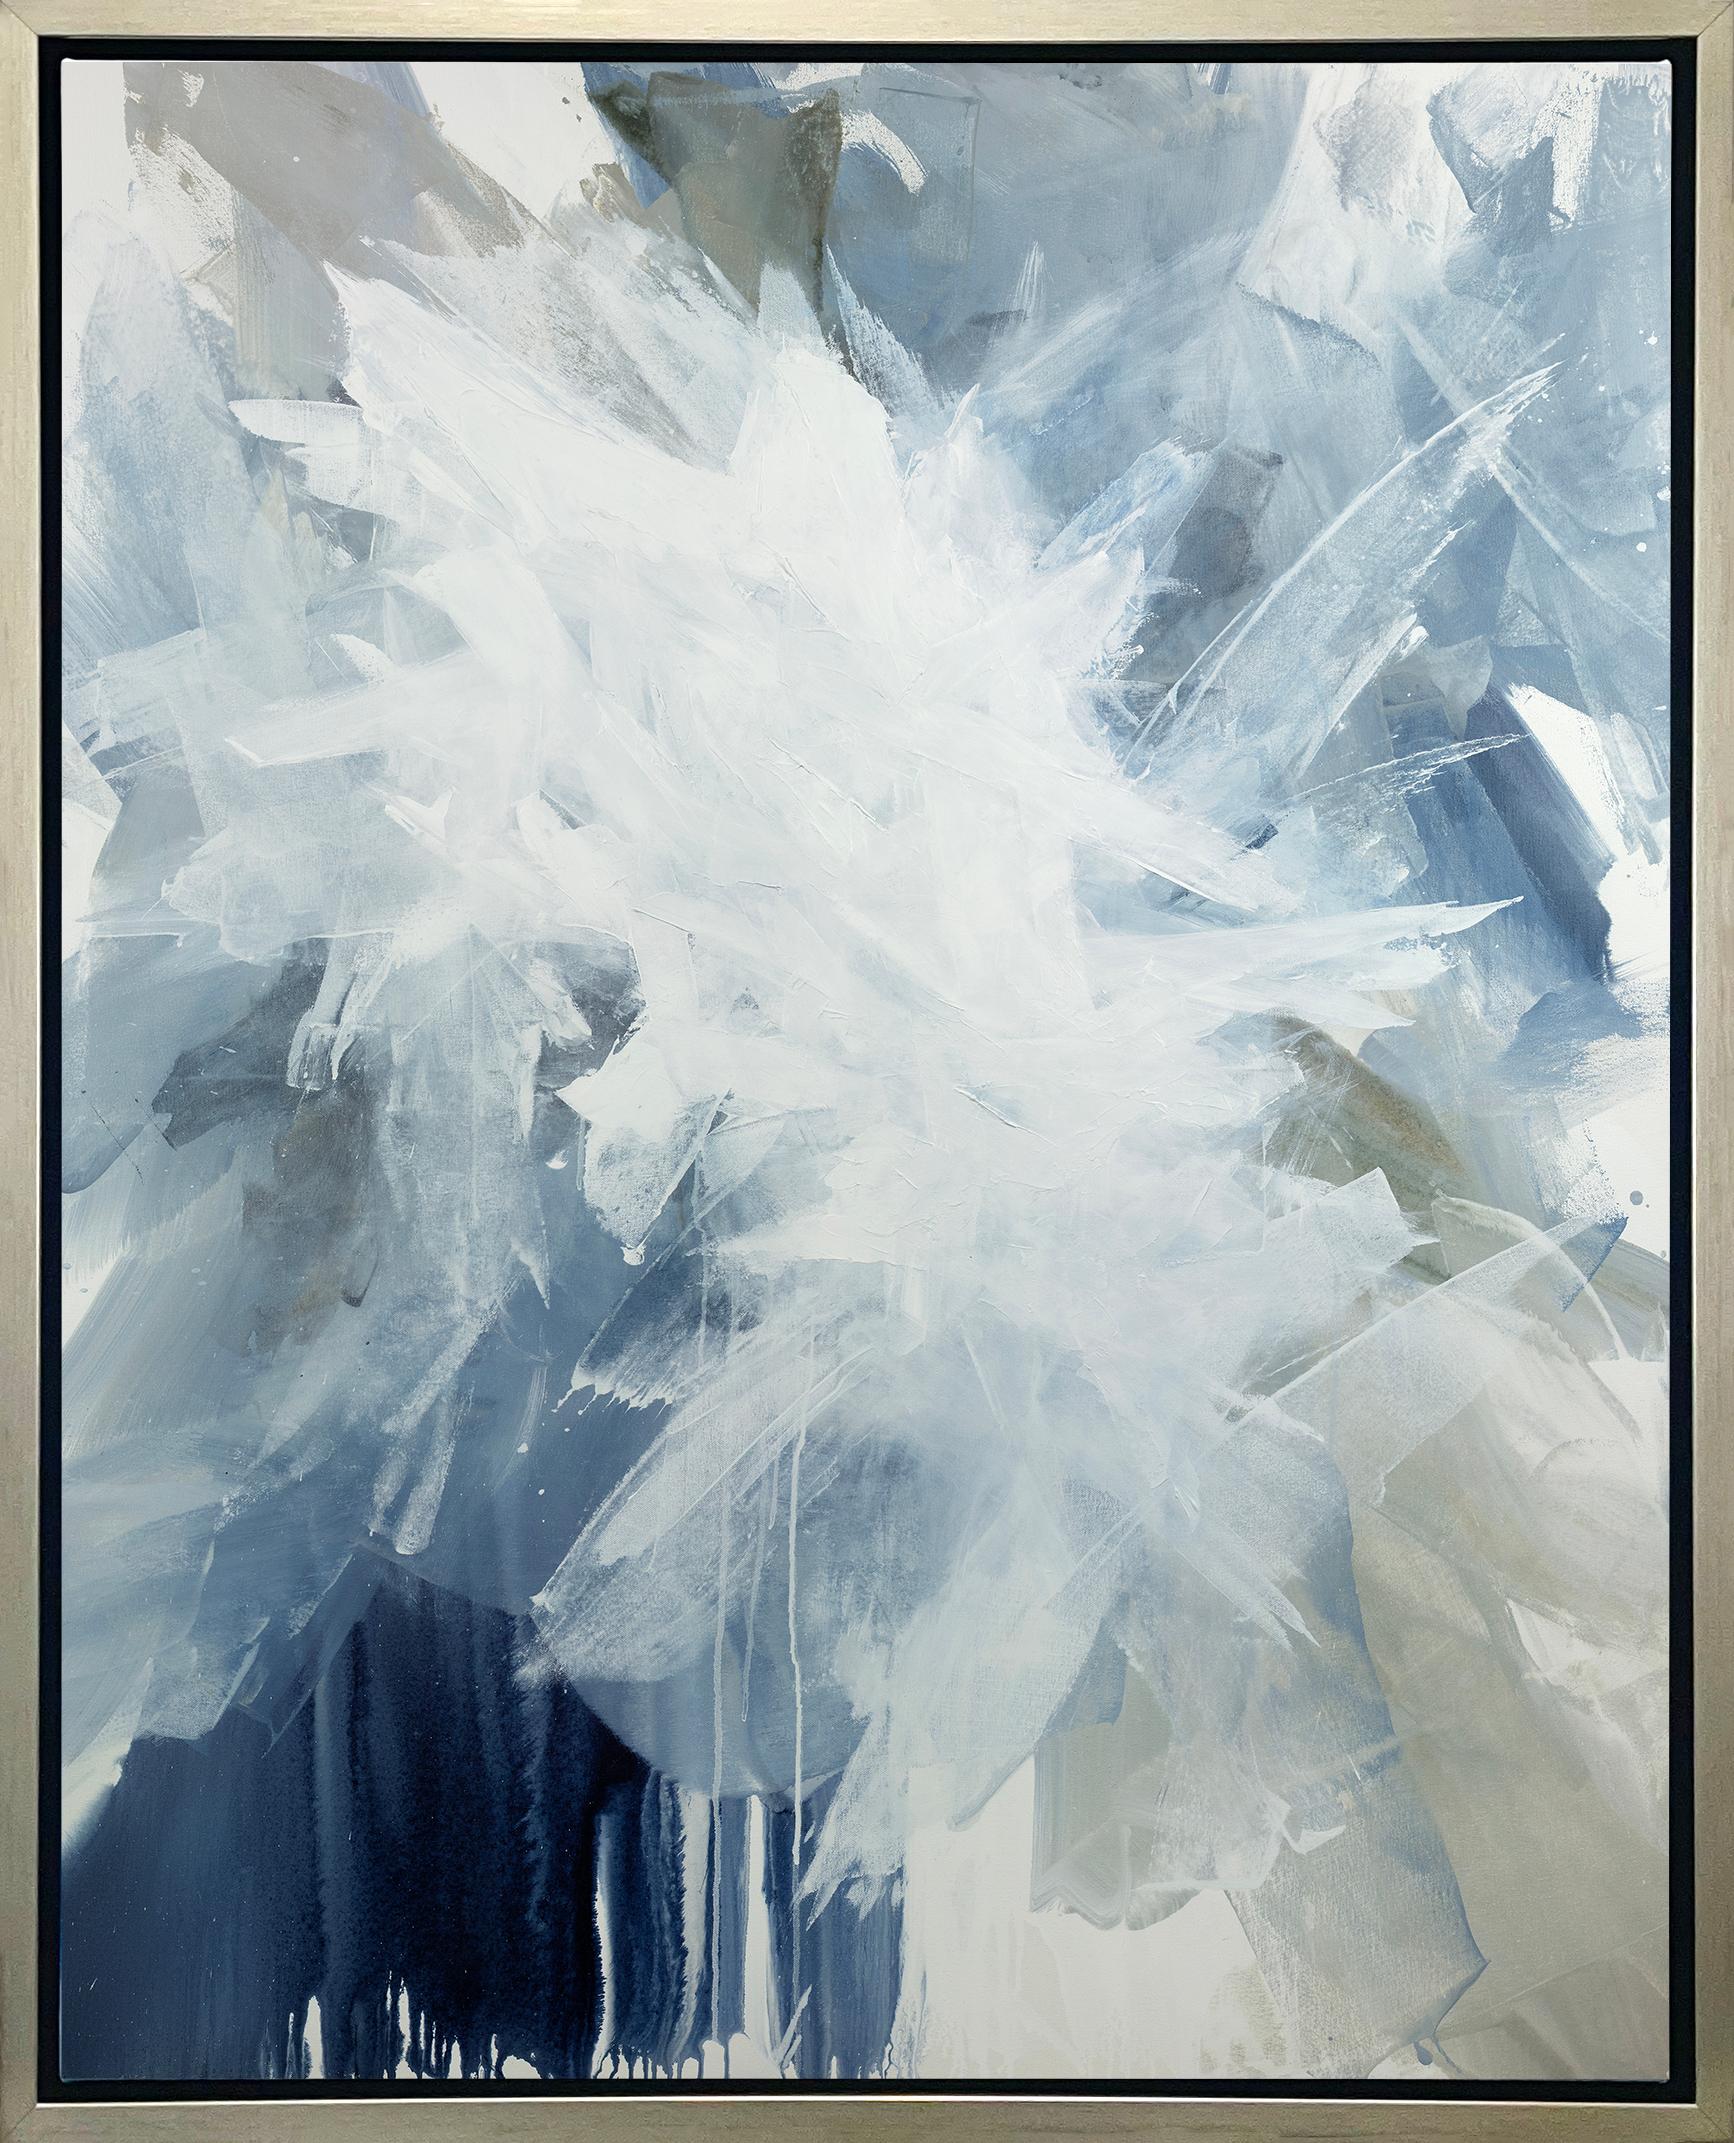 Teodora Guererra Abstract Print - "White Dove, " Framed Limited Edition Giclee Print, 30" x 24"